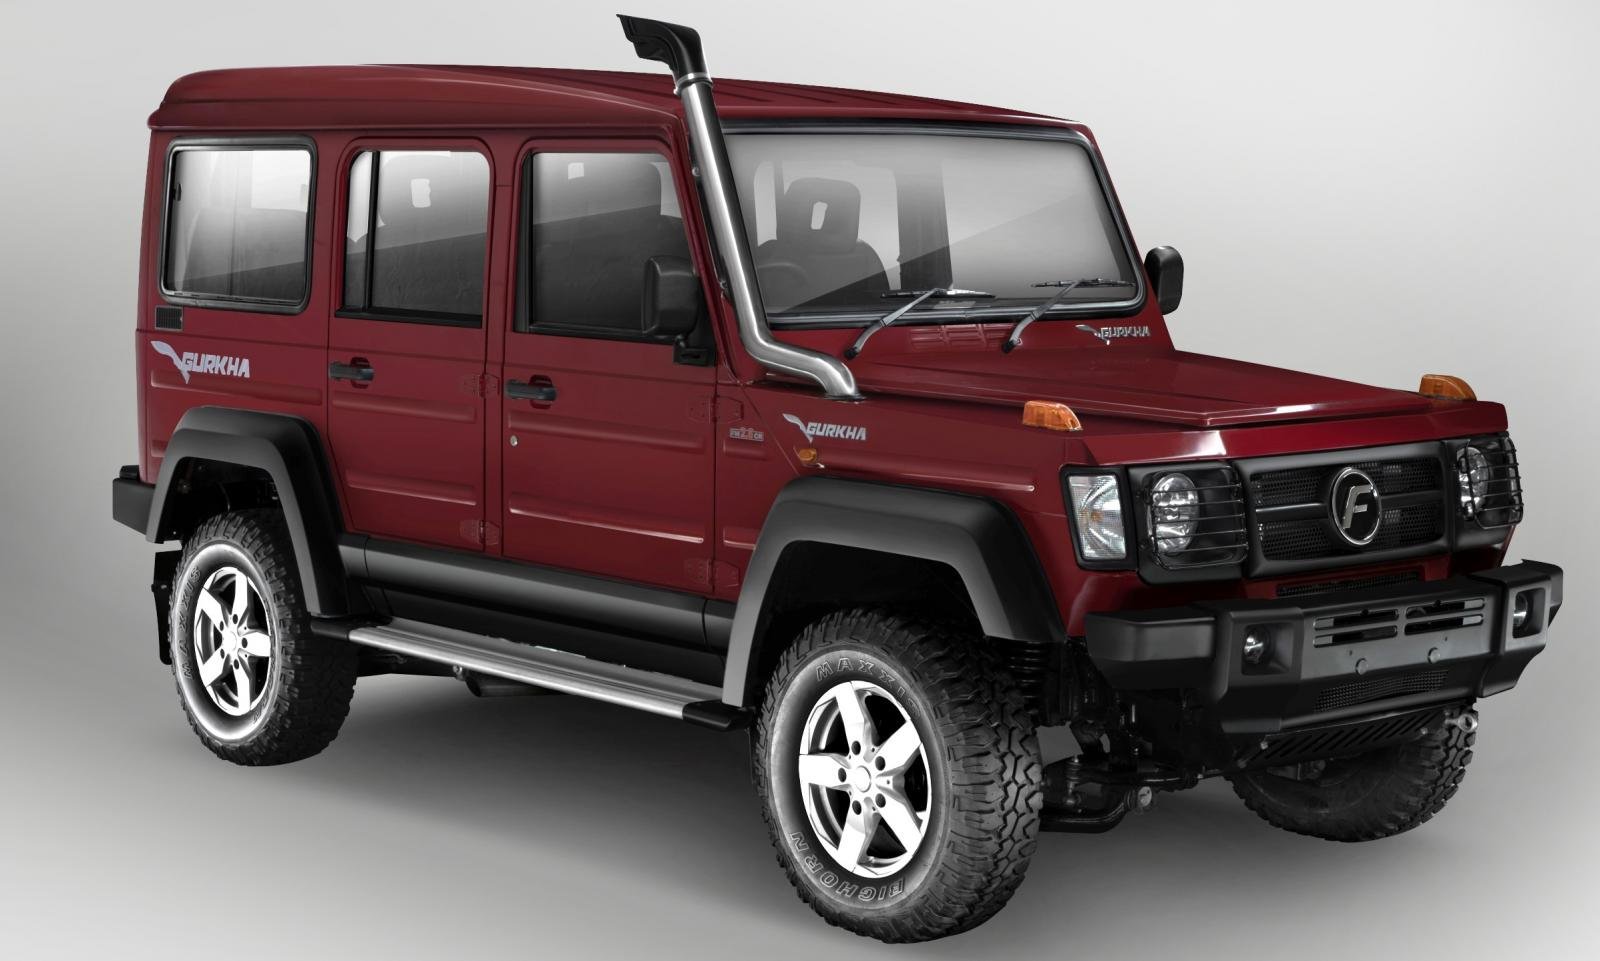 Force Gurkha 5Door In The Works, Launch Expected Next Year